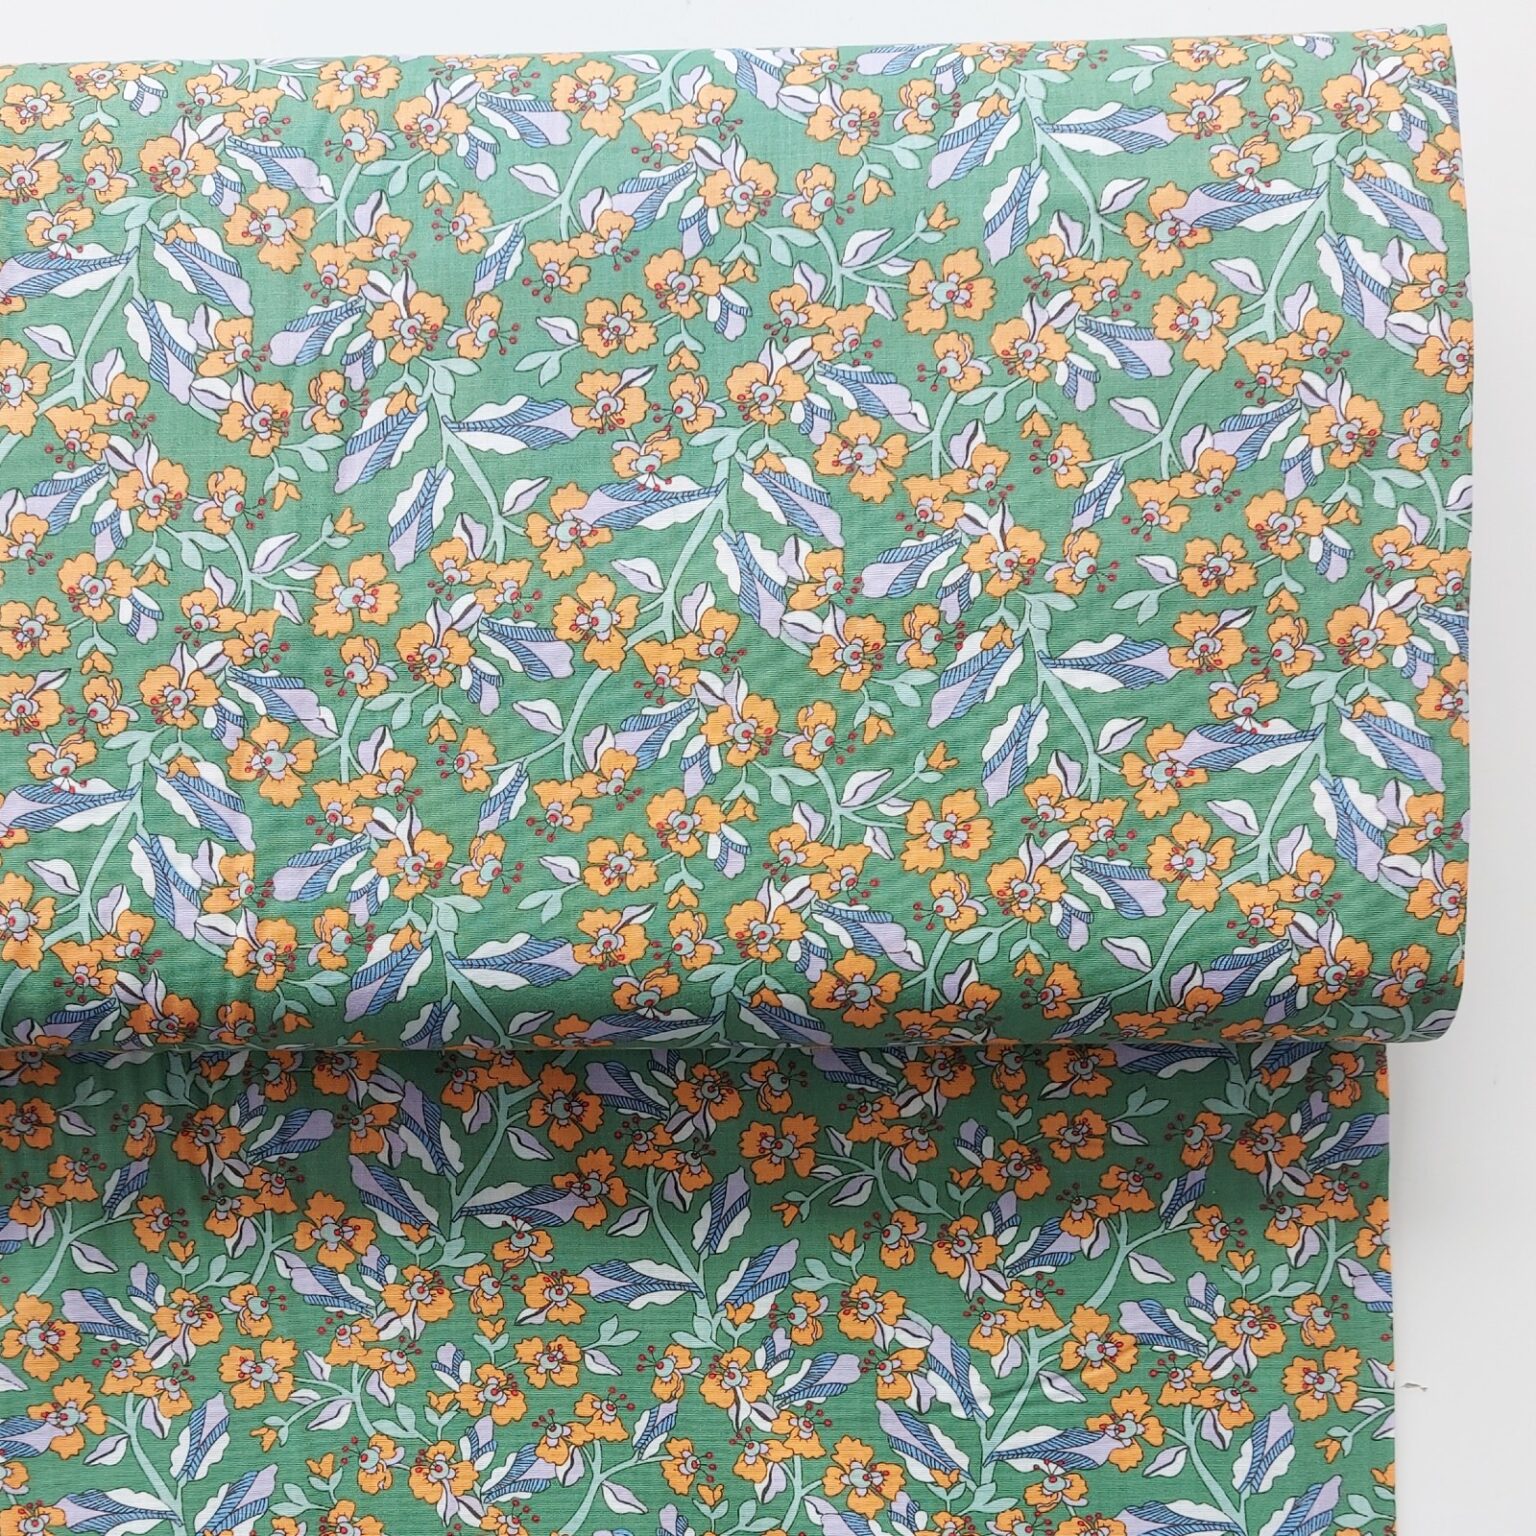 Retro Floral Green cotton fabric | More Sewing